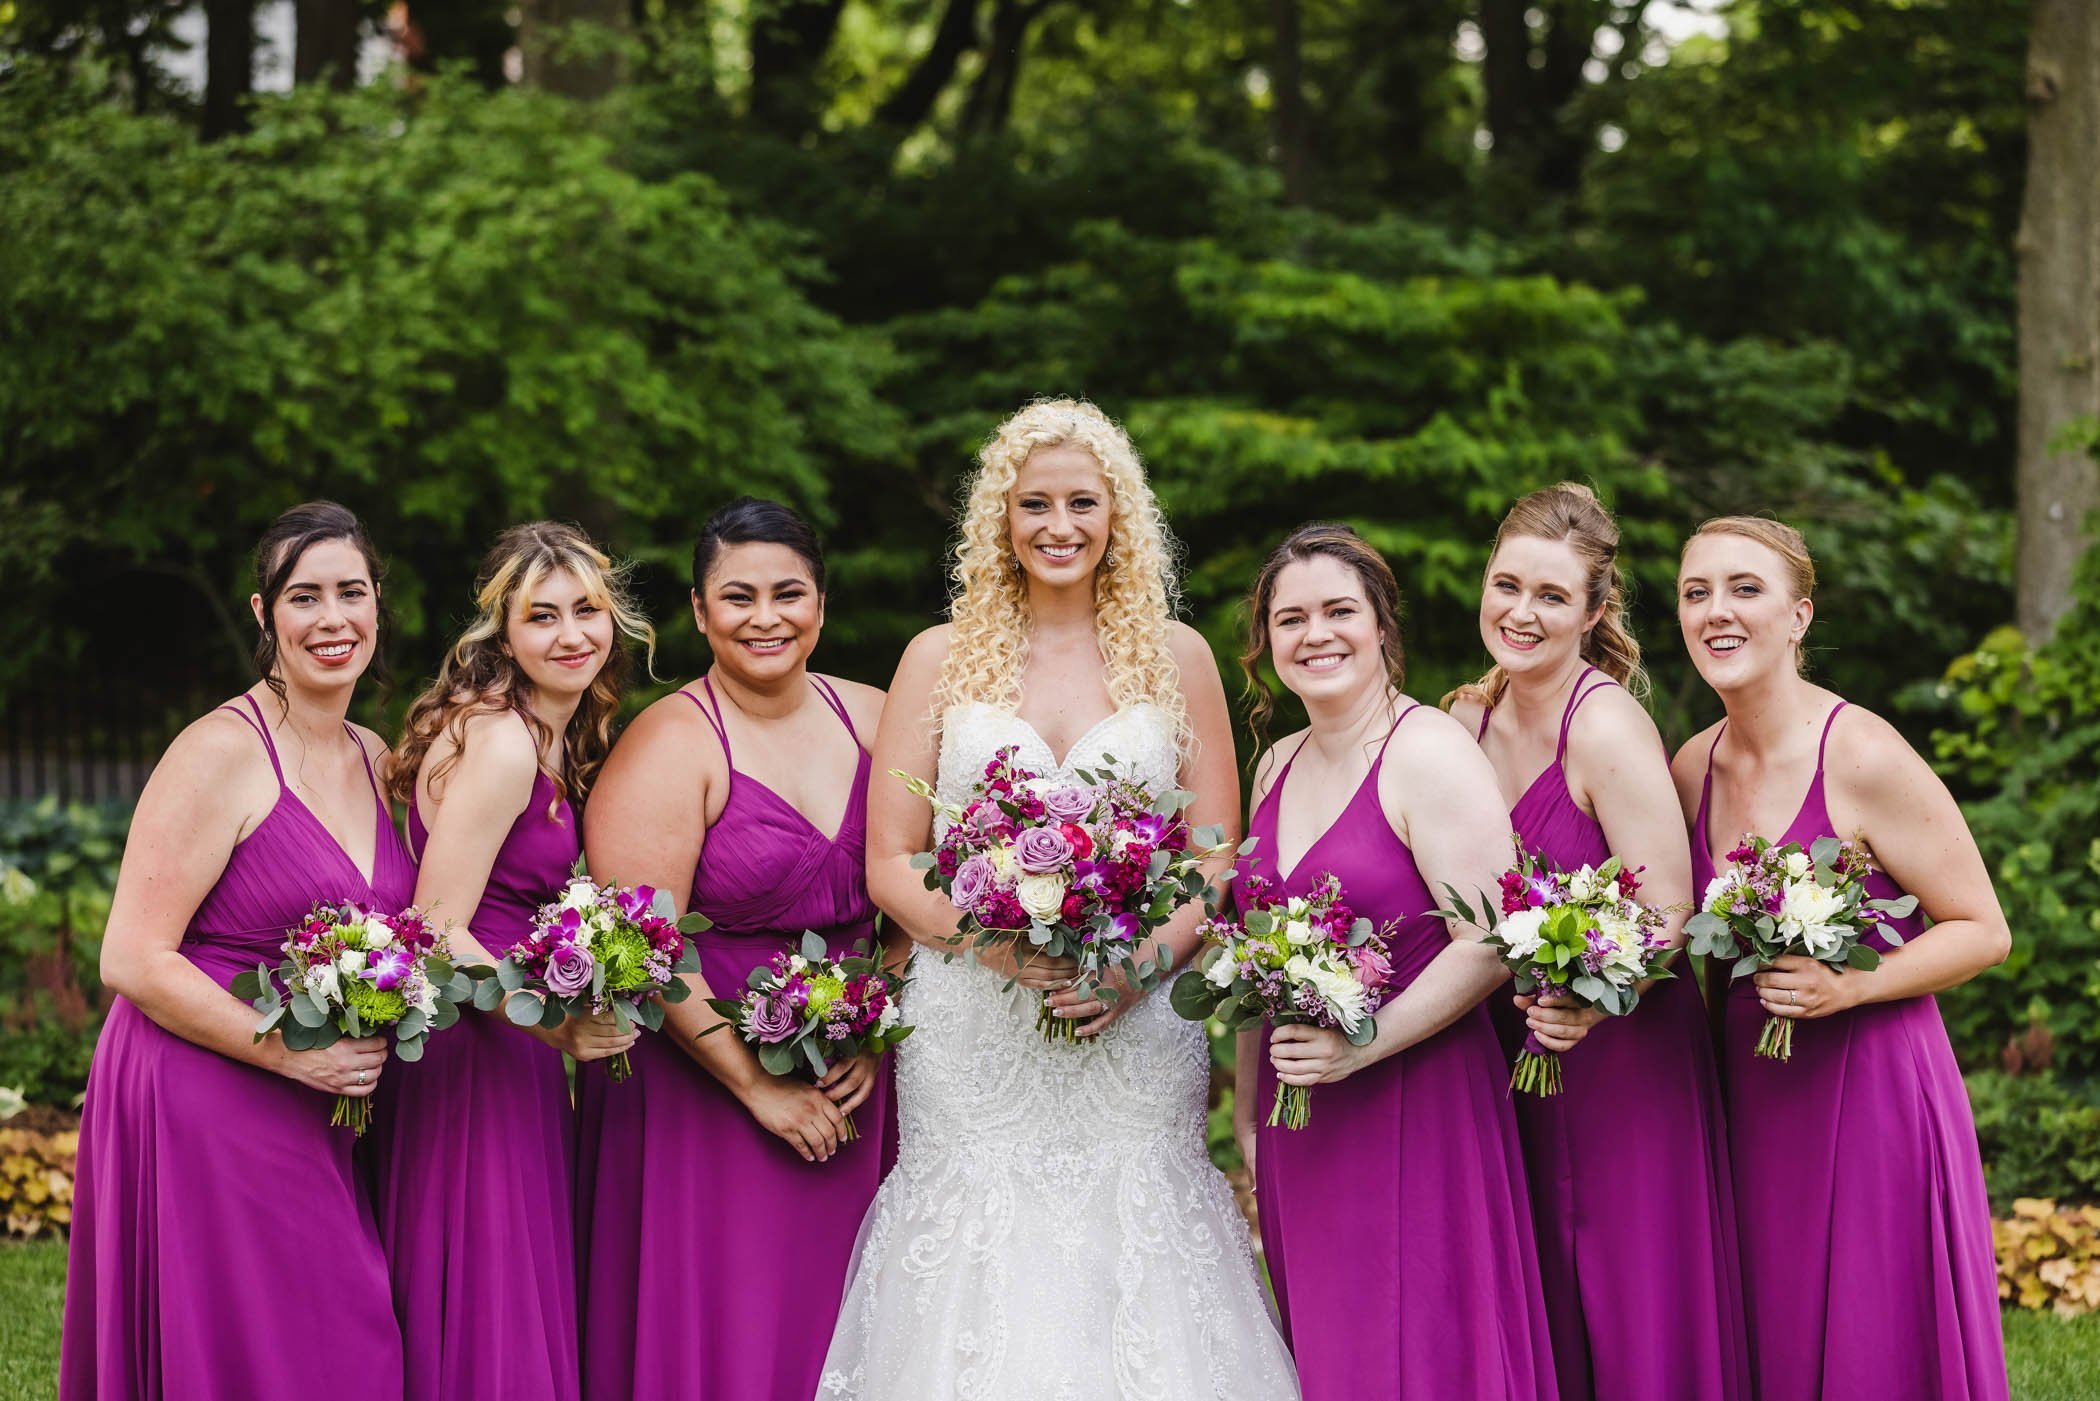 Bride and bridemaids with purple dresses